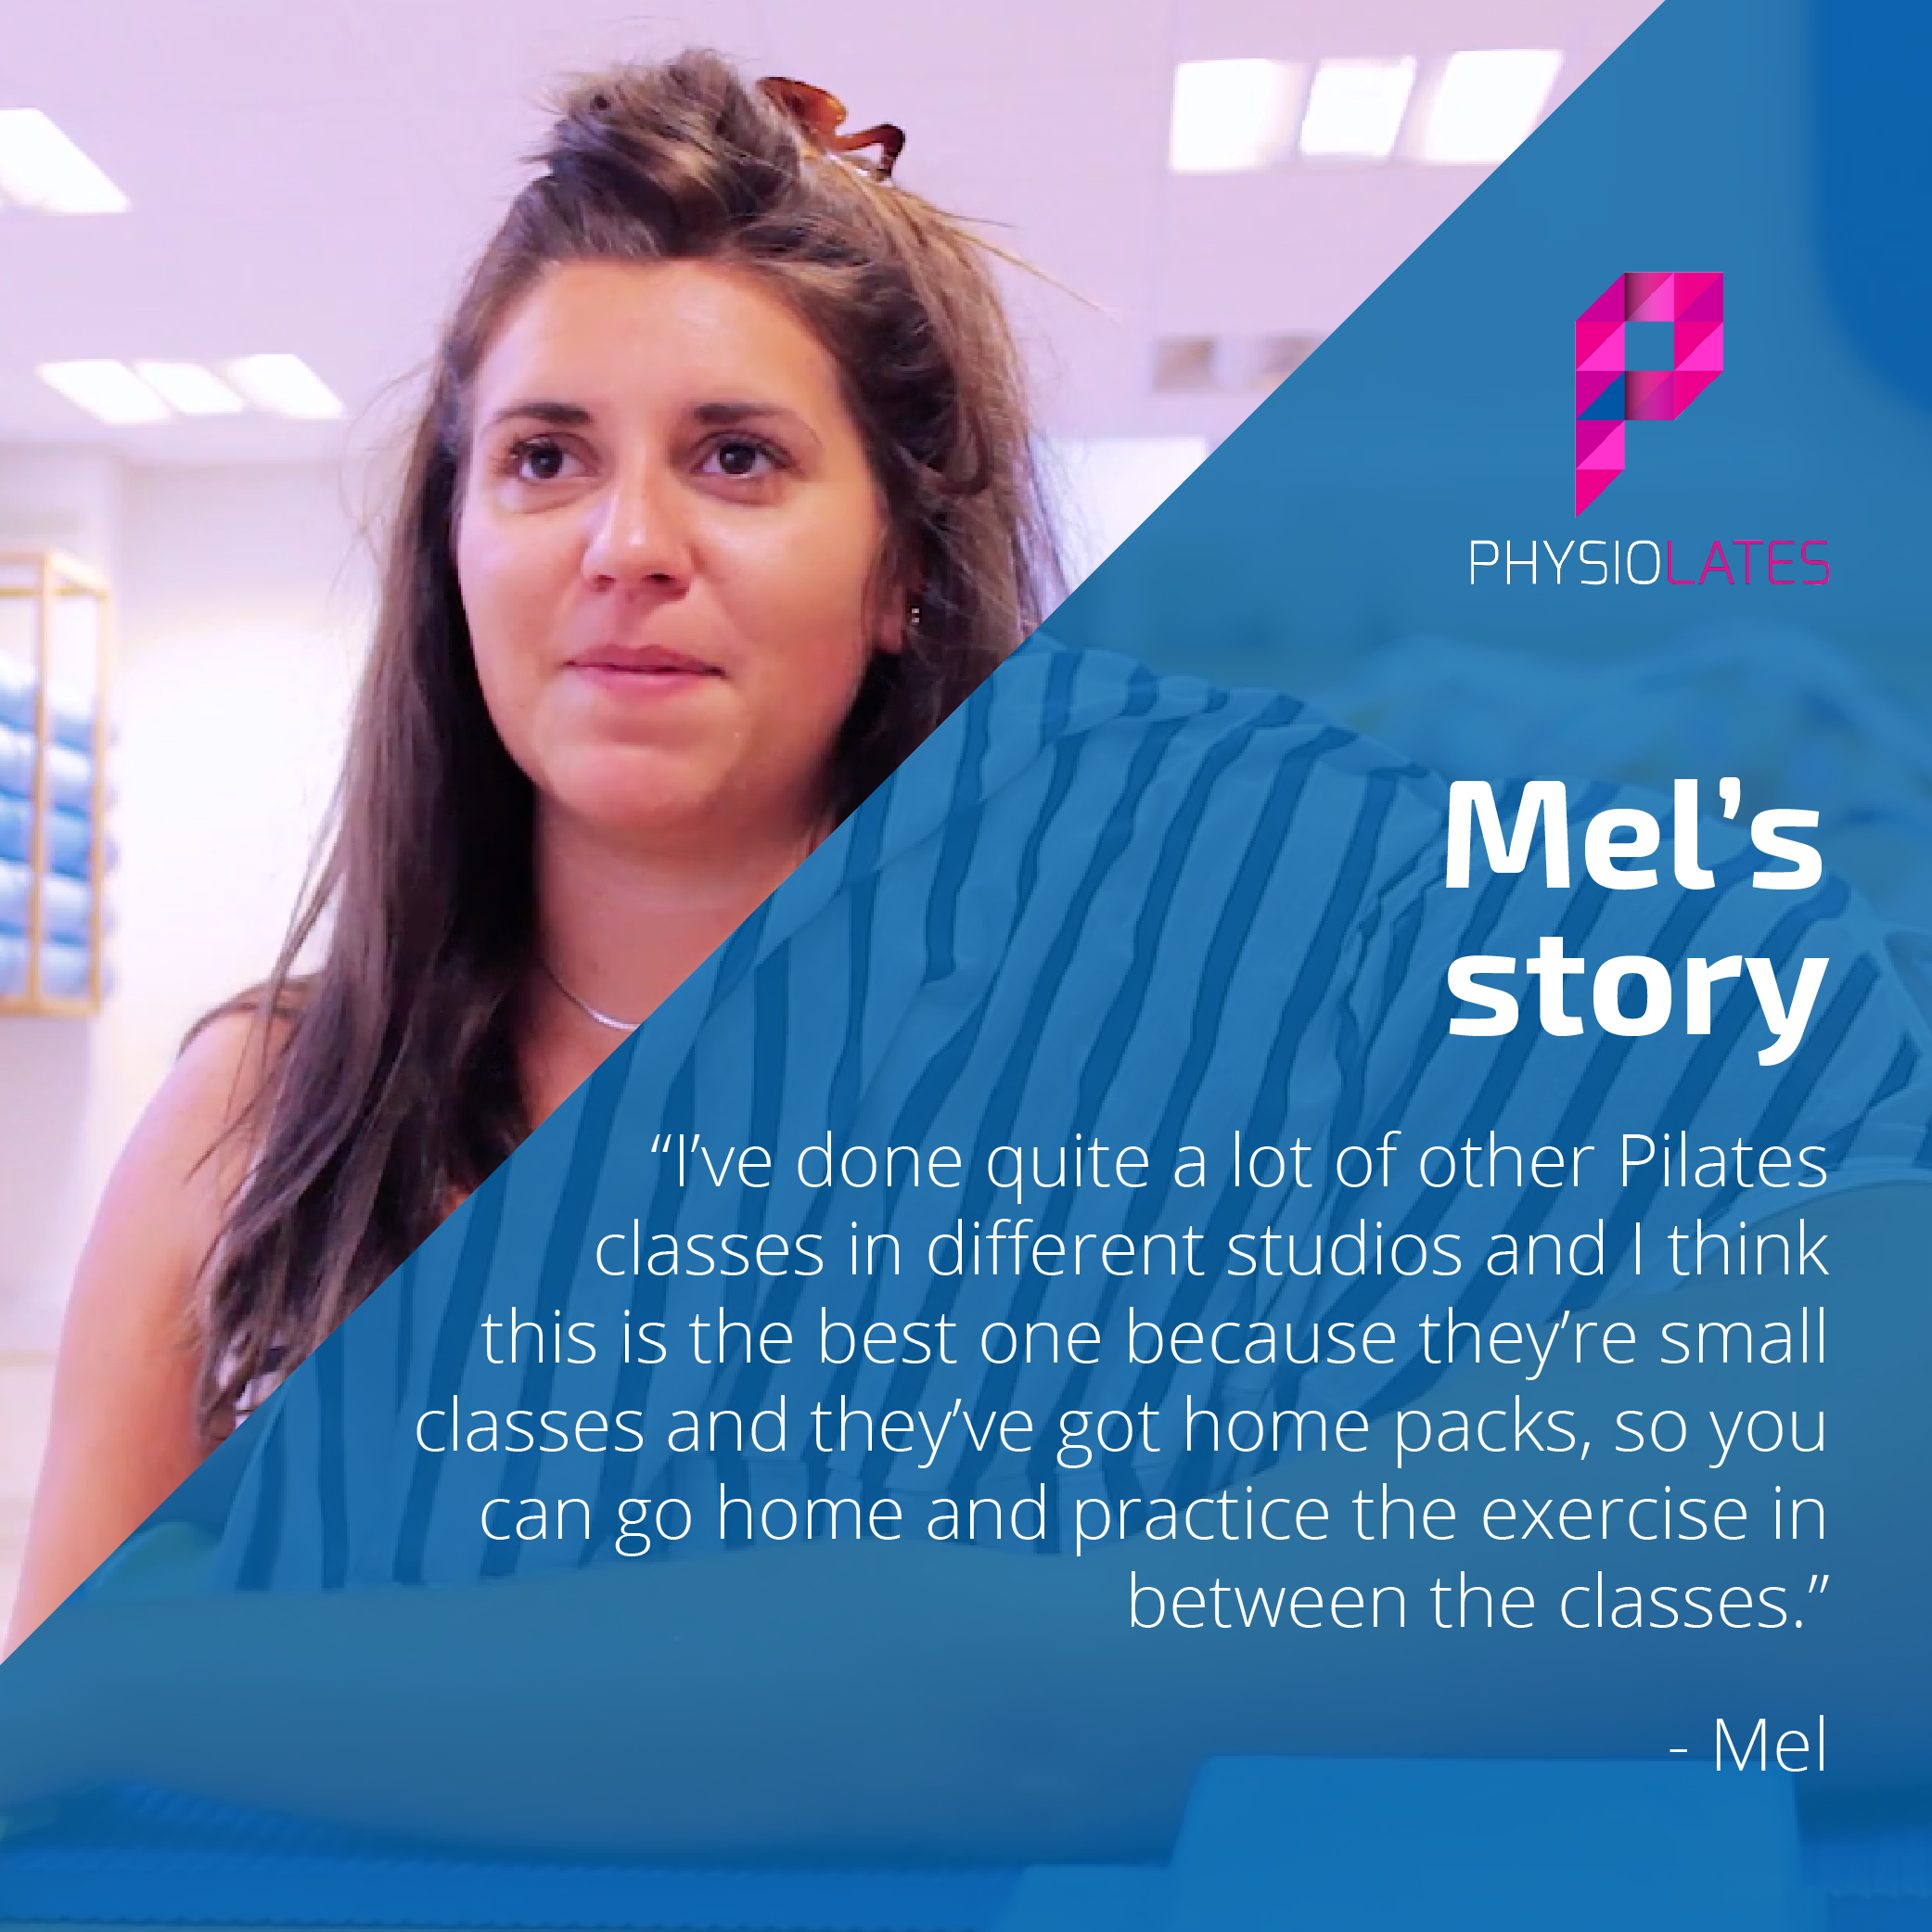 Mel's story, I've done quite a lot of other Pilates classes in different studios and i think this is the best one.